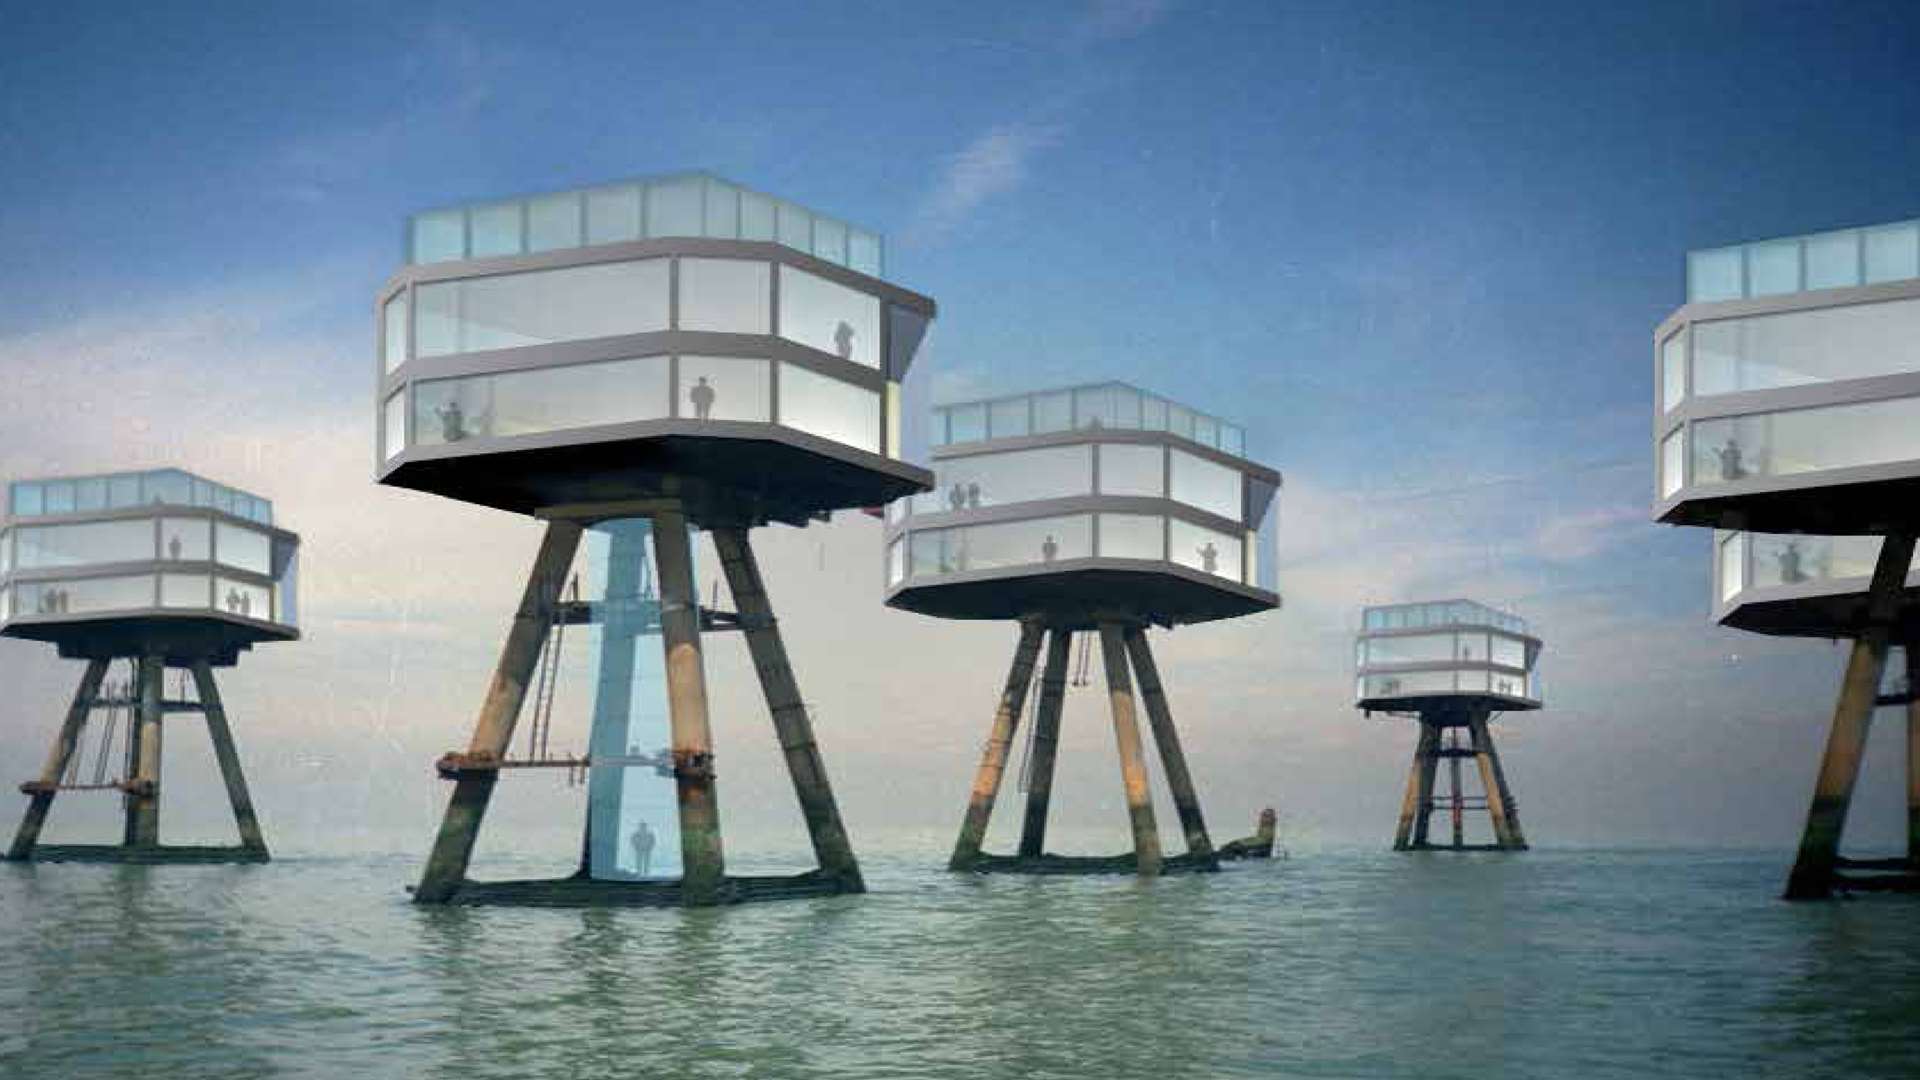 The outside of the Red Sands sea forts. Picture: Next Big Thing Creative